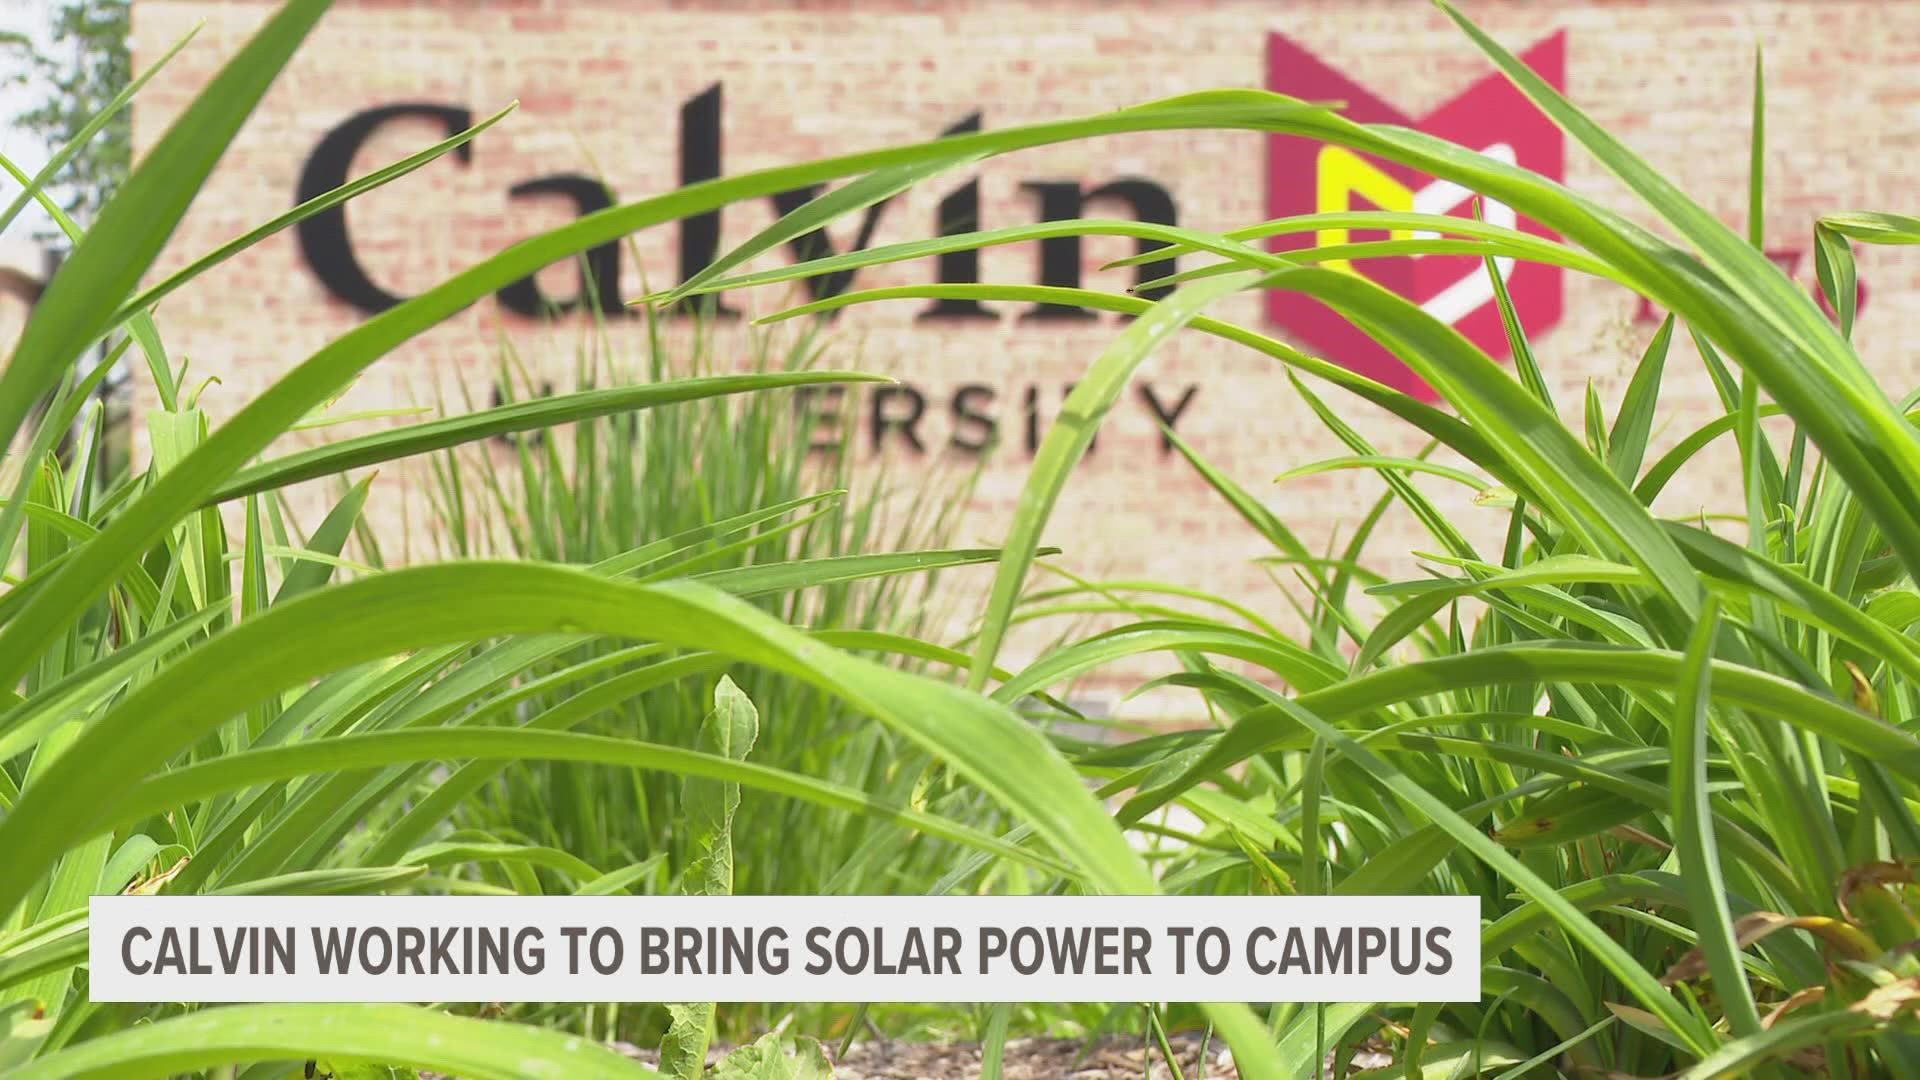 Calvin University has entered into an agreement with an Indiana-based company that will help bring solar panels to campus to cut its carbon footprint.